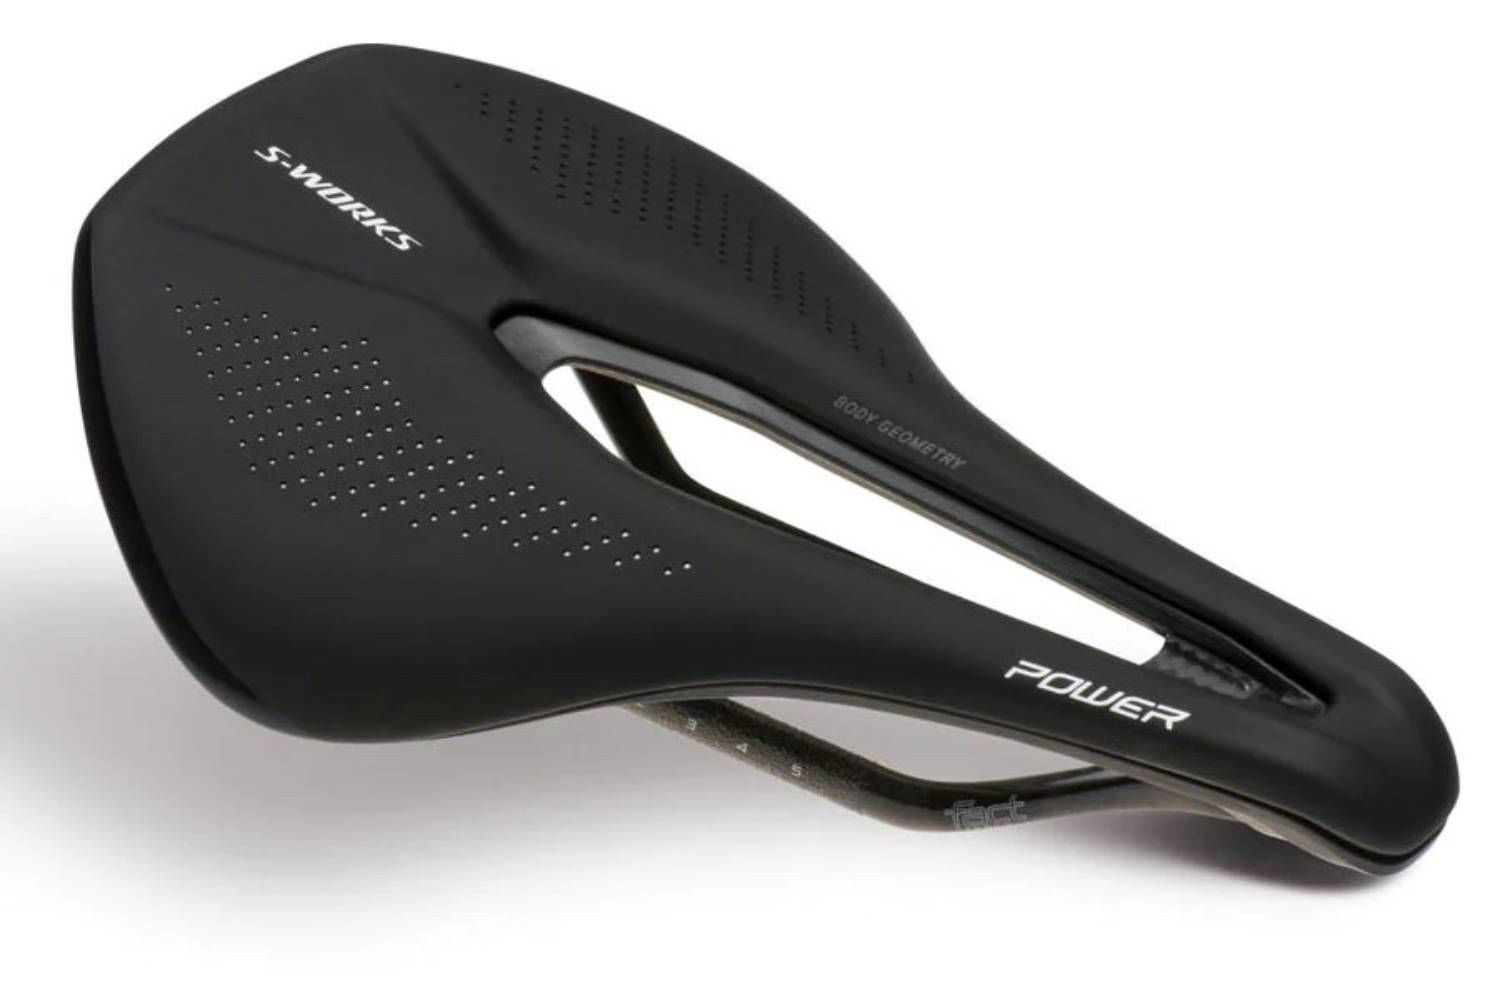 Picture of Specialized S-Works Power Black Saddle 143mm